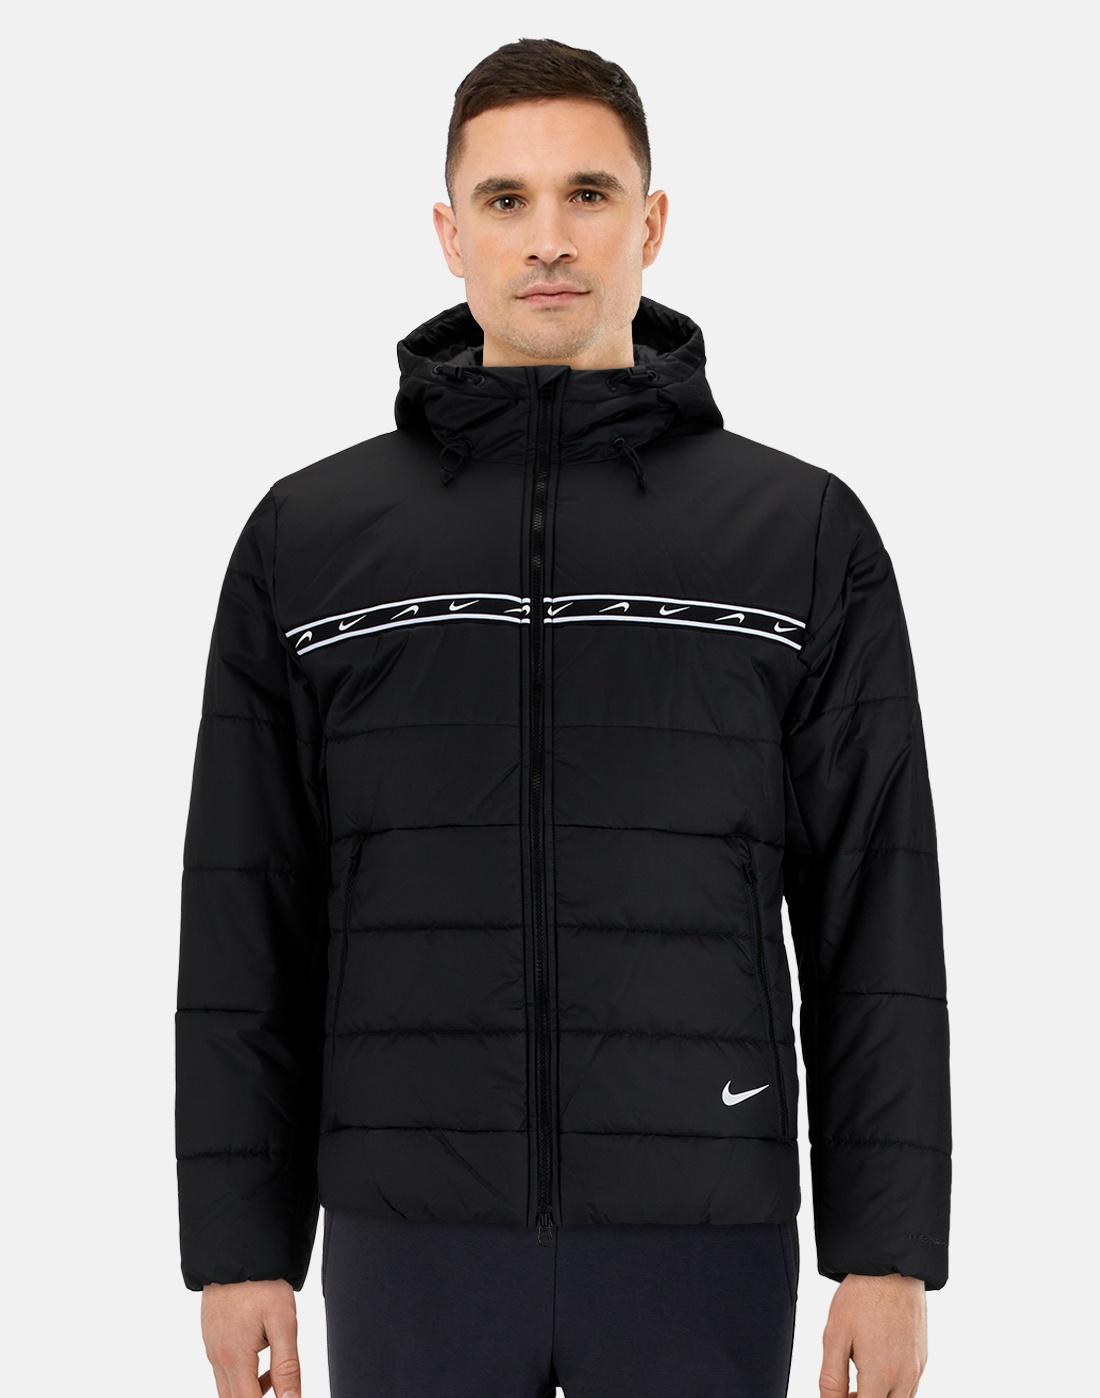 Nike Mens Repeat Jacket - Black | Life Style Sports IE